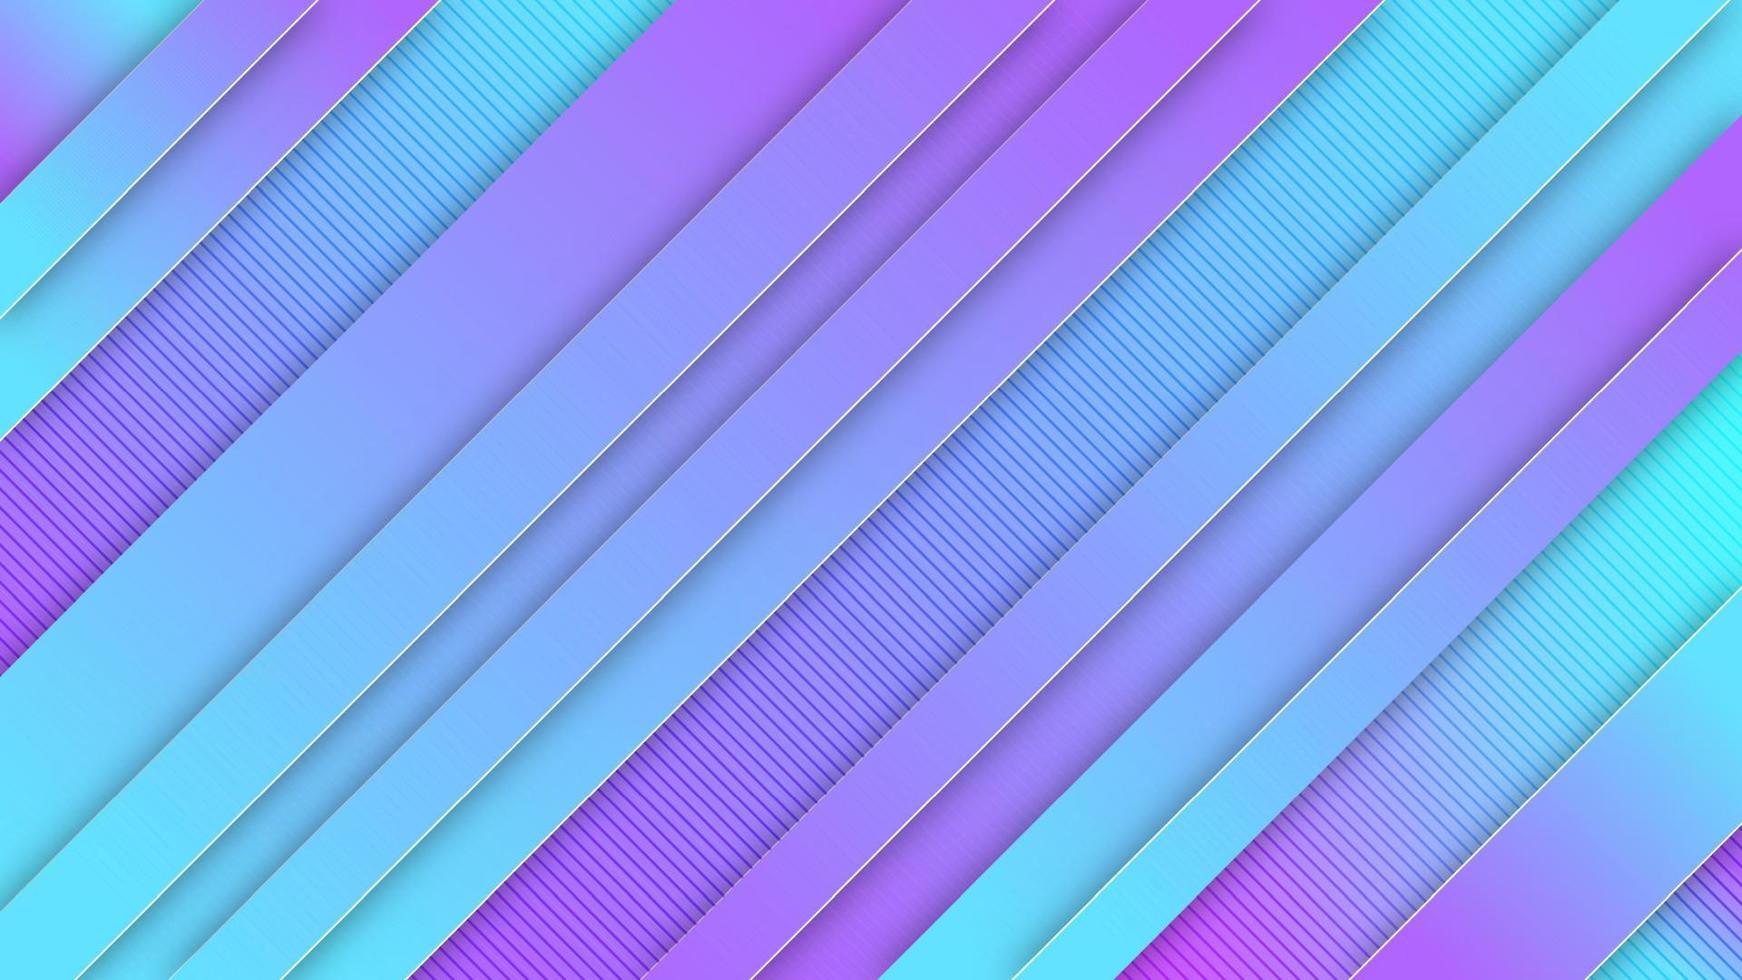 Abstract blue and purple background. Vector illustration.